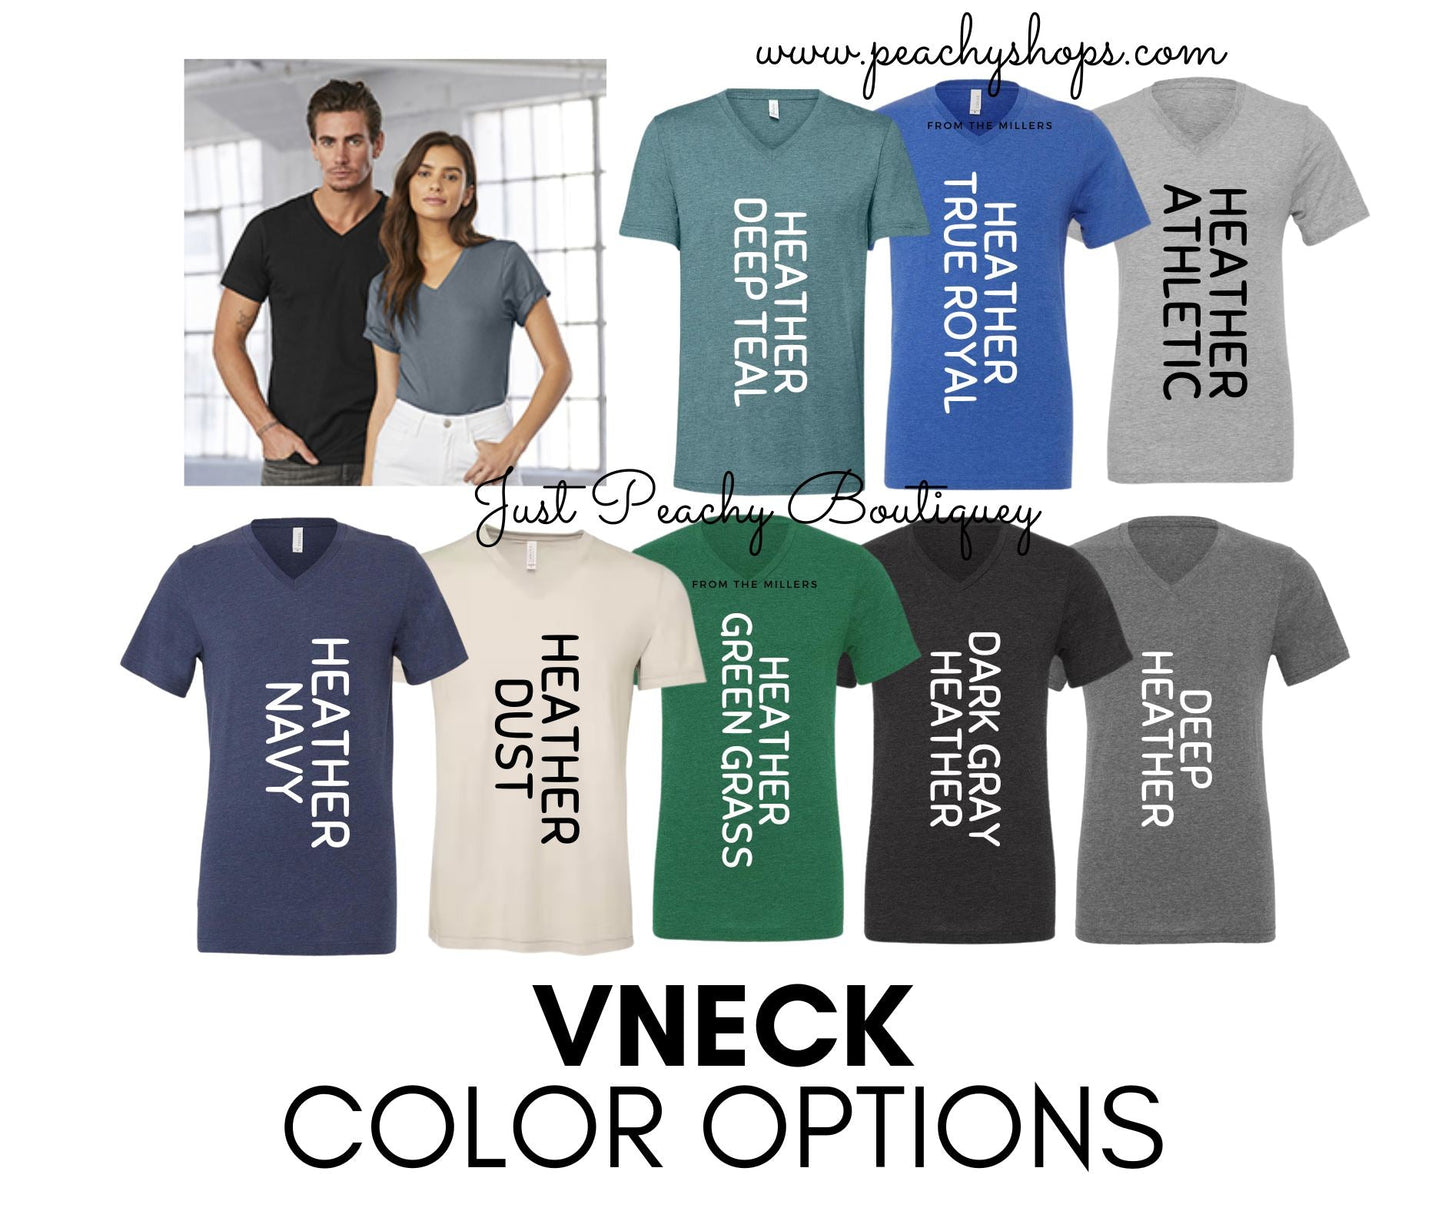 THE PACK T-SHIRT OR PICK FROM 200 COLOR & STYLE OPTIONS! - TAT 4-7 DAYS